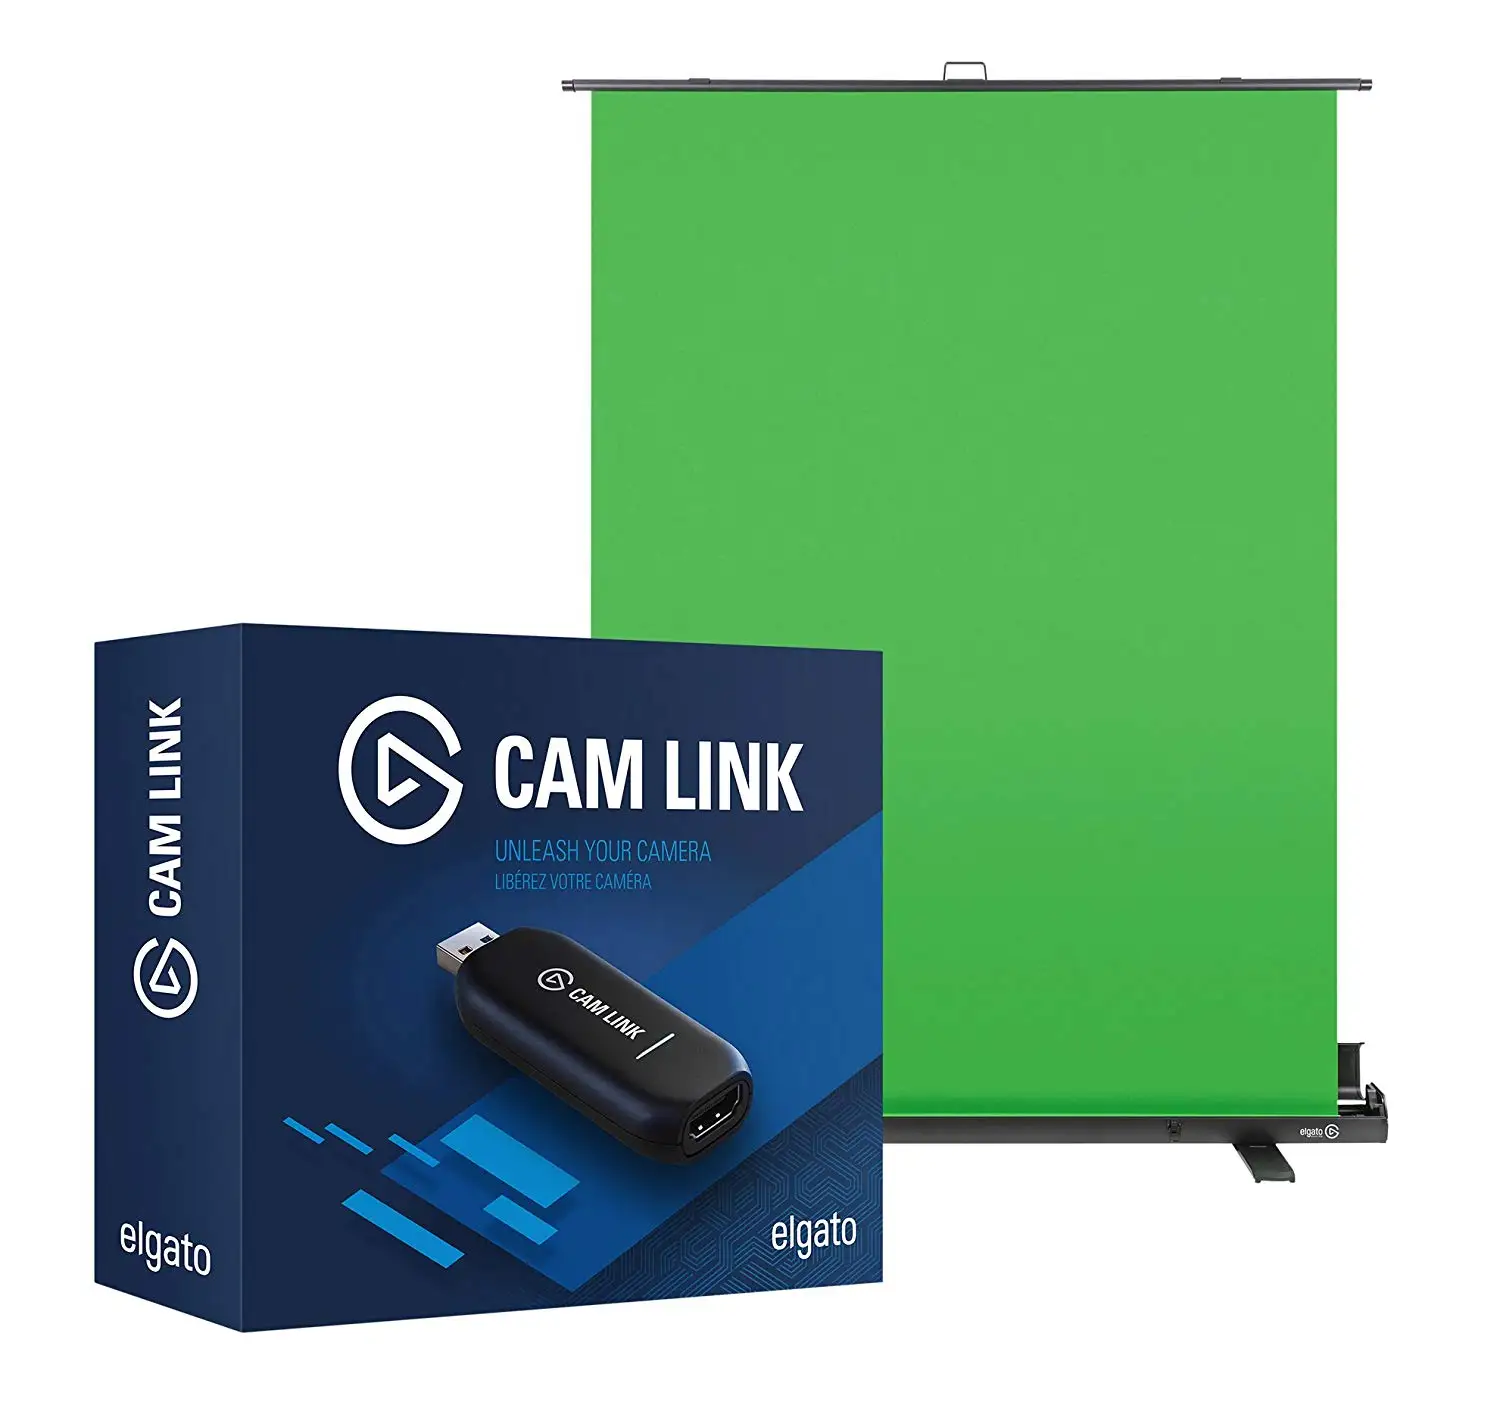 Buy Elgato Cam Link Broadcast Live And Record Via Dslr Camcorder Or Action Cam In 1080p60 Compact Hdmi Capture Device Usb 3 0 In Cheap Price On Alibaba Com